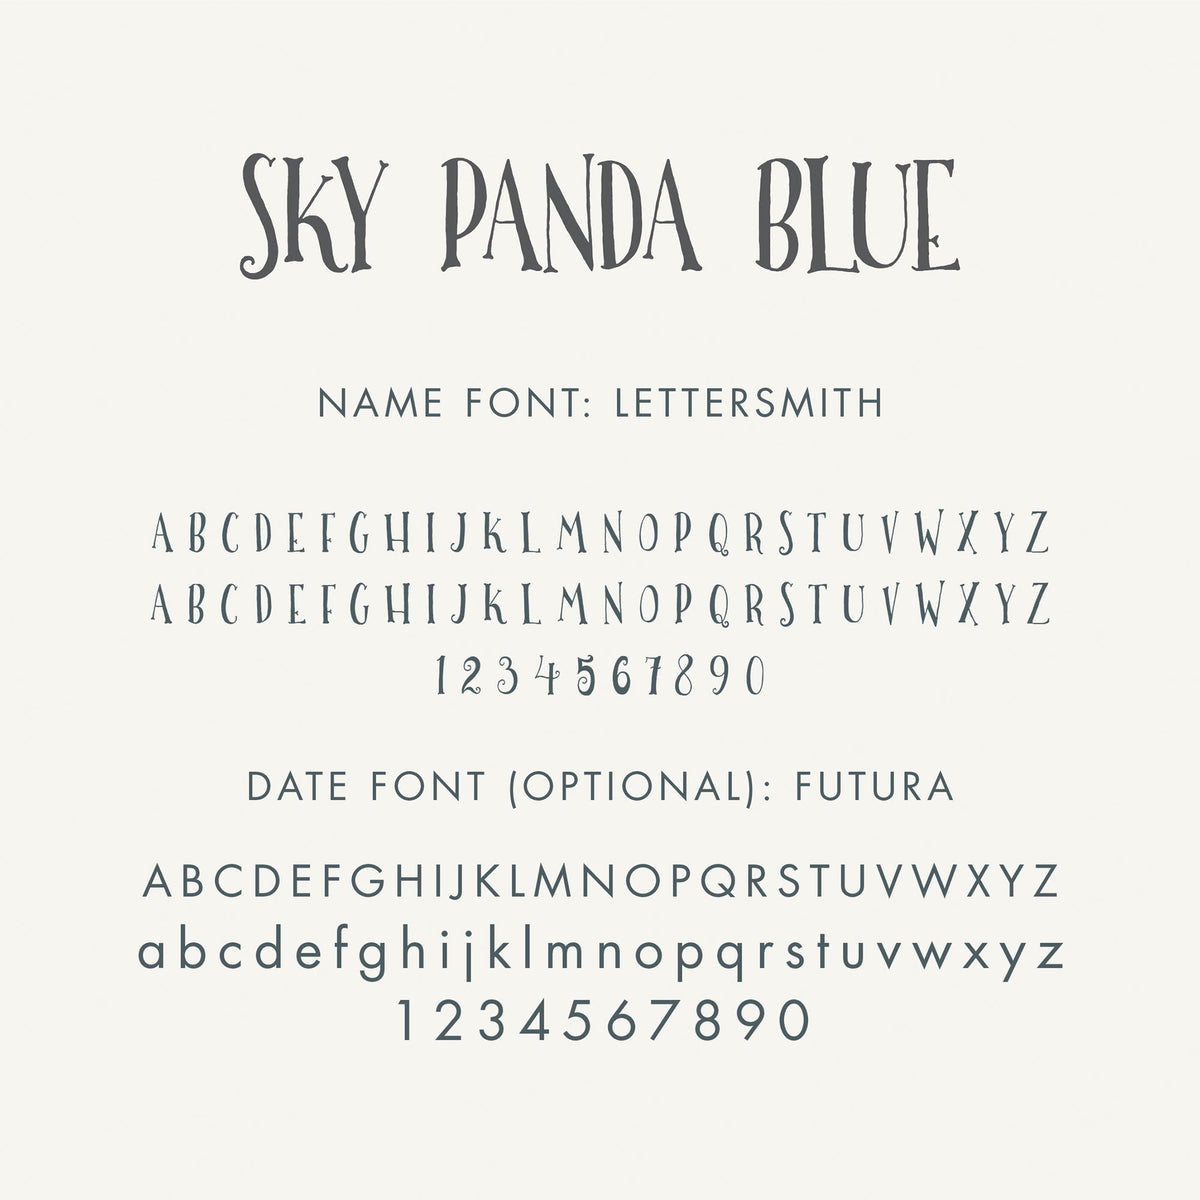 Baby&#39;s First Book | Printed Cover: Sky Panda Blue | Available Personalized